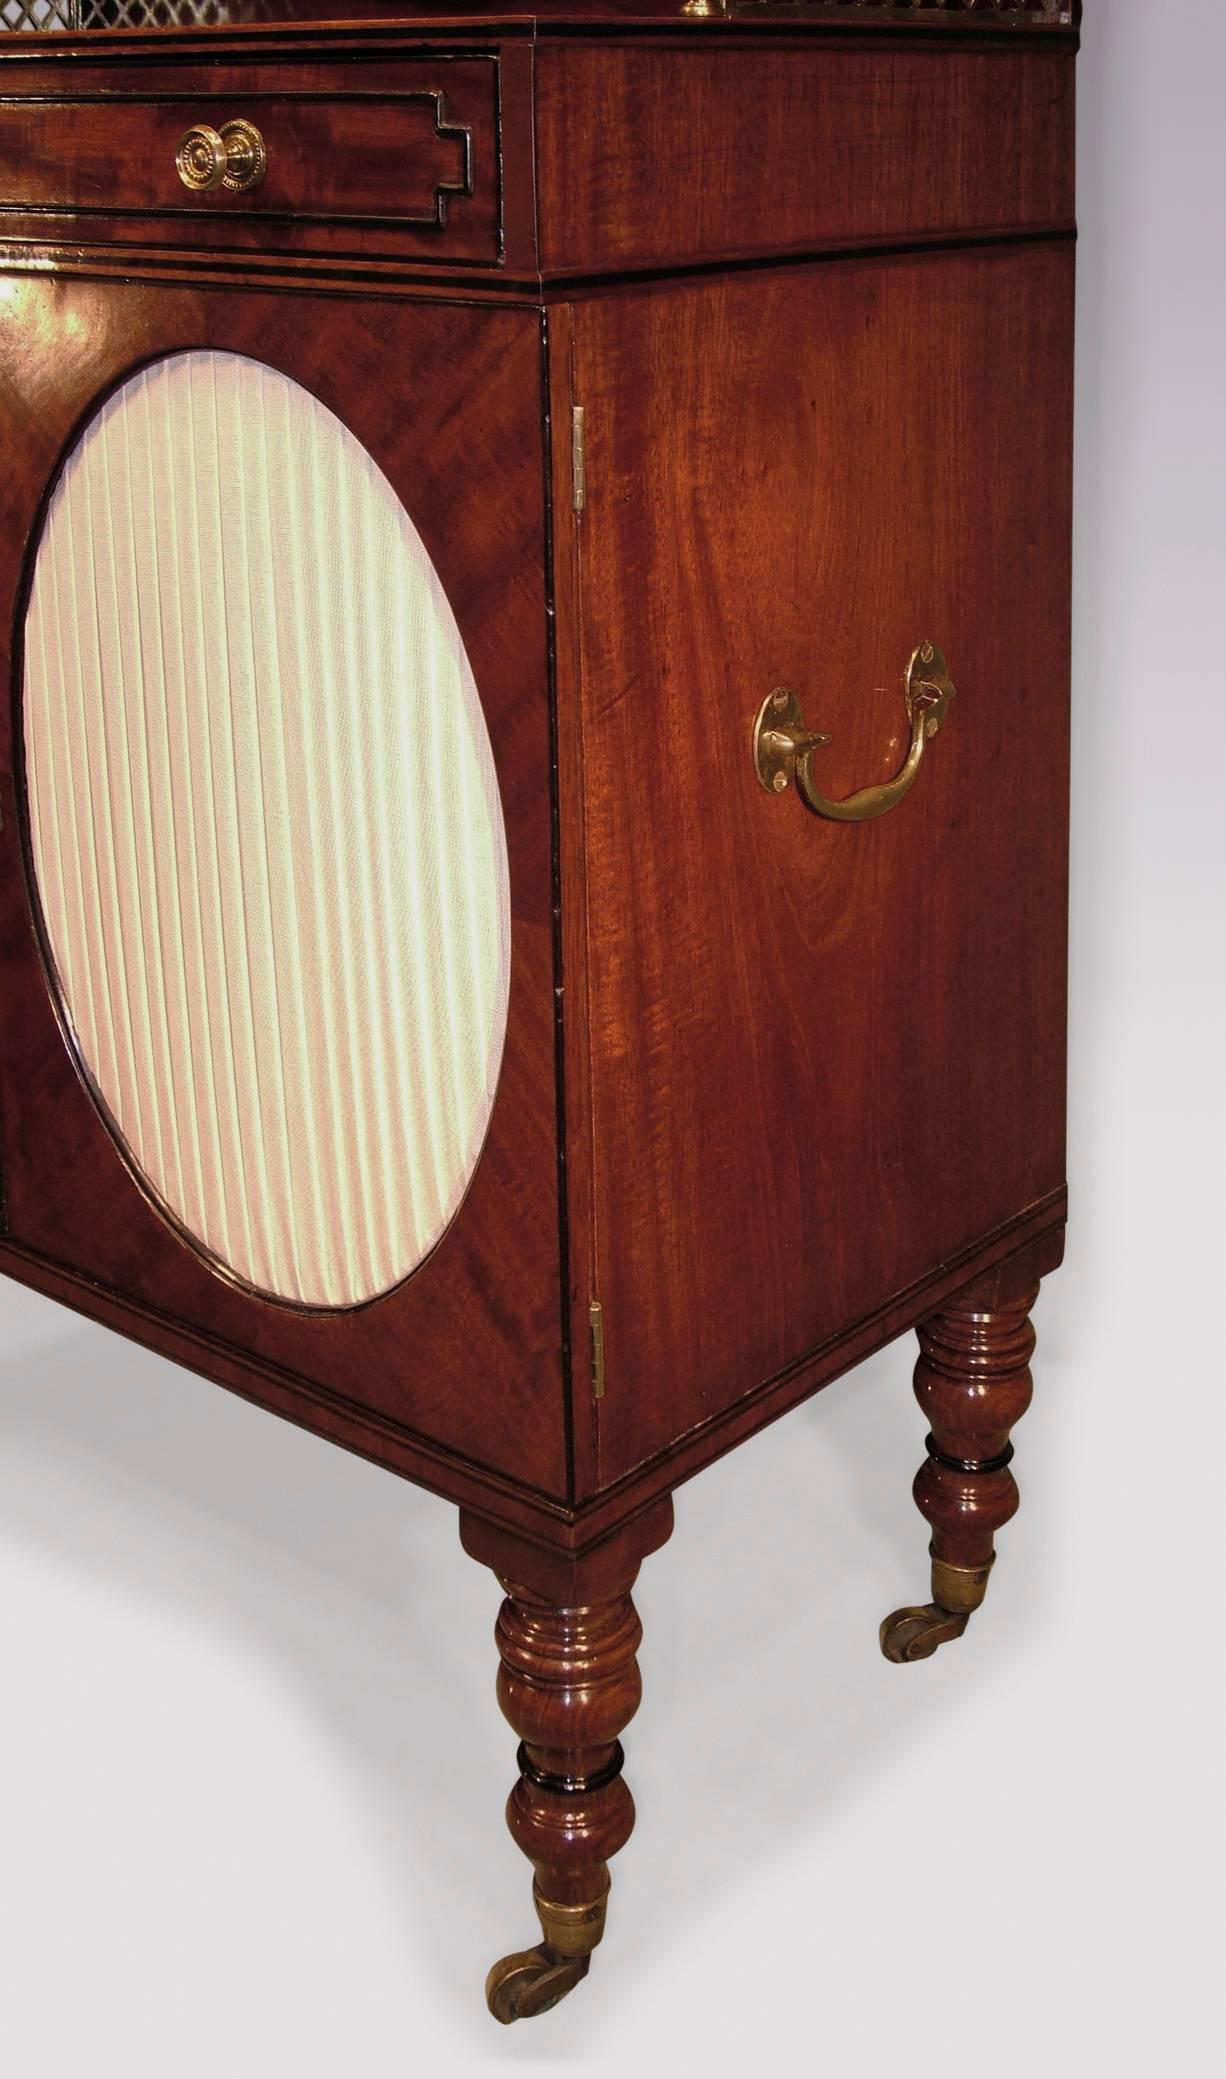 Polished Early 19th Century Regency Period Figured Mahogany Chiffonier For Sale